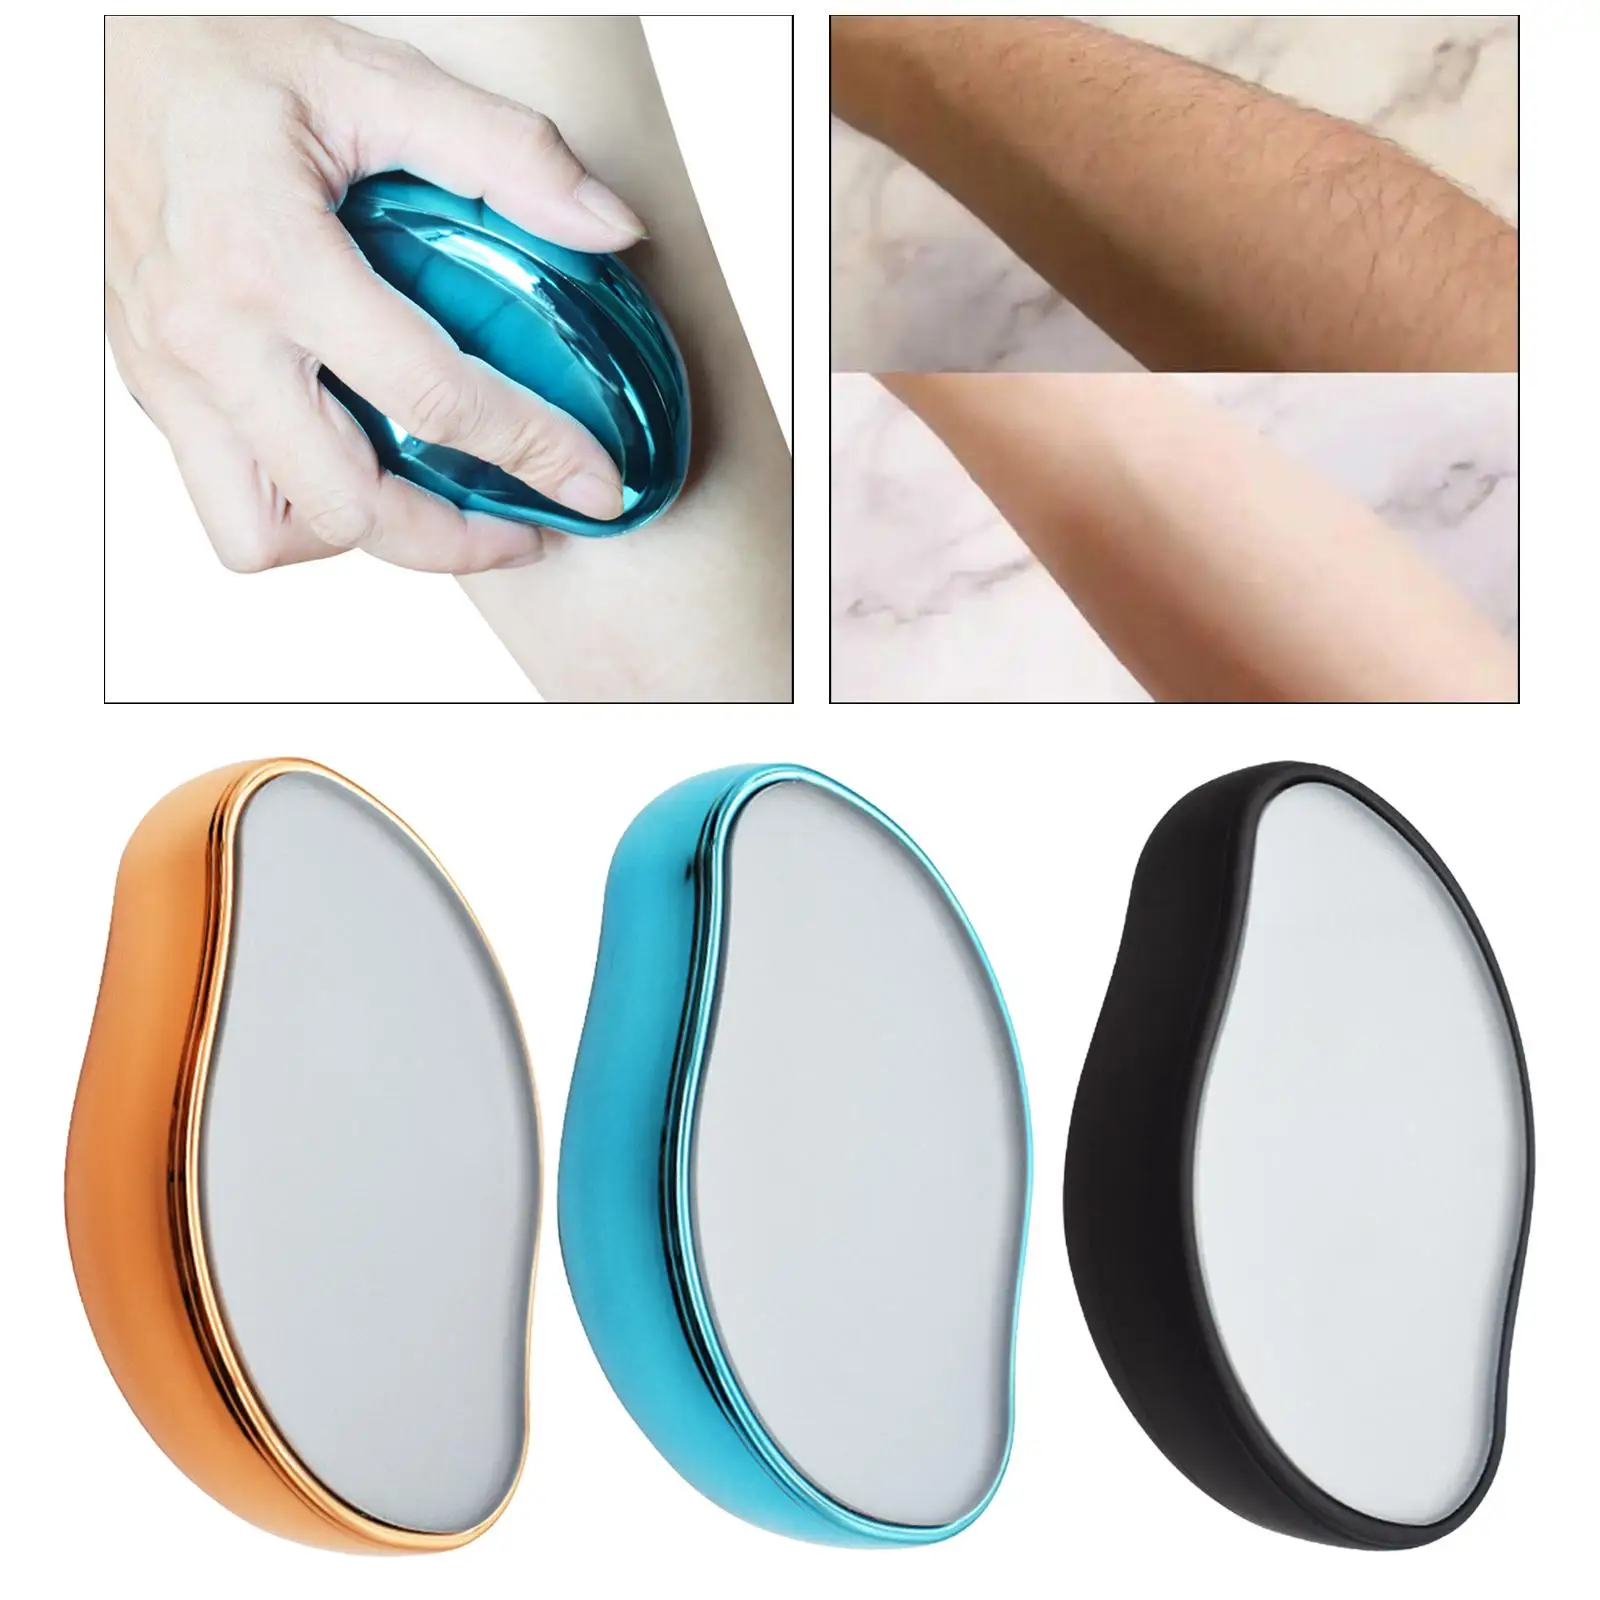 New Hair Removal Epilators Depilation Exfoliating Tool Painless Physical Hair Remover for Body Leg Safe Epilator Easy Cleaning